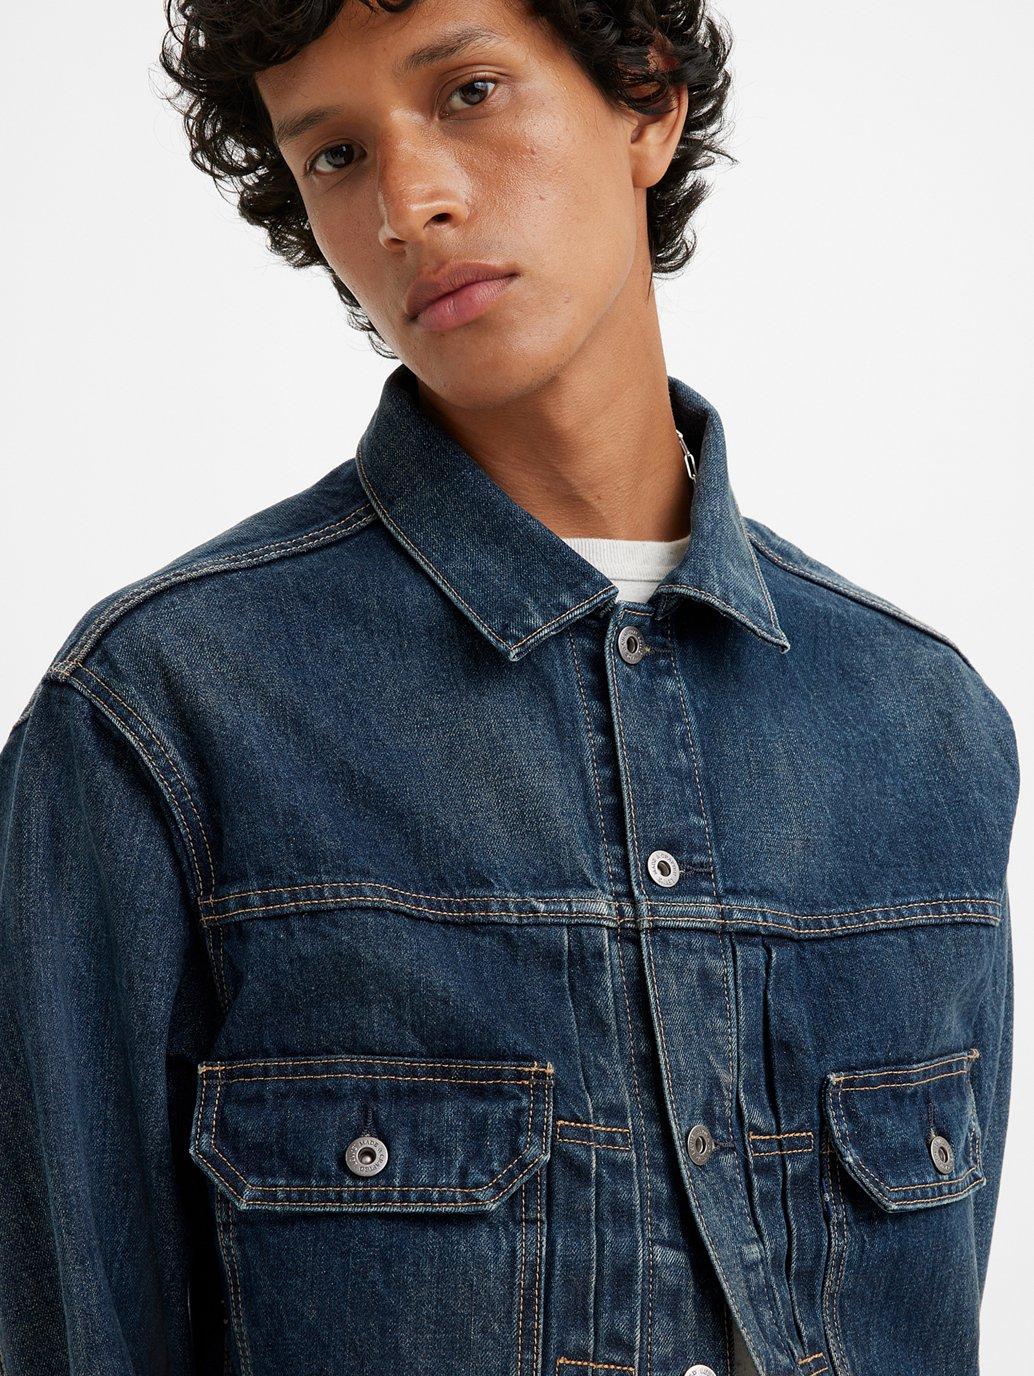 Buy Levi's® Made & Crafted® Men's Oversized Type II Trucker Jacket | Levi's®  Official Online Store M